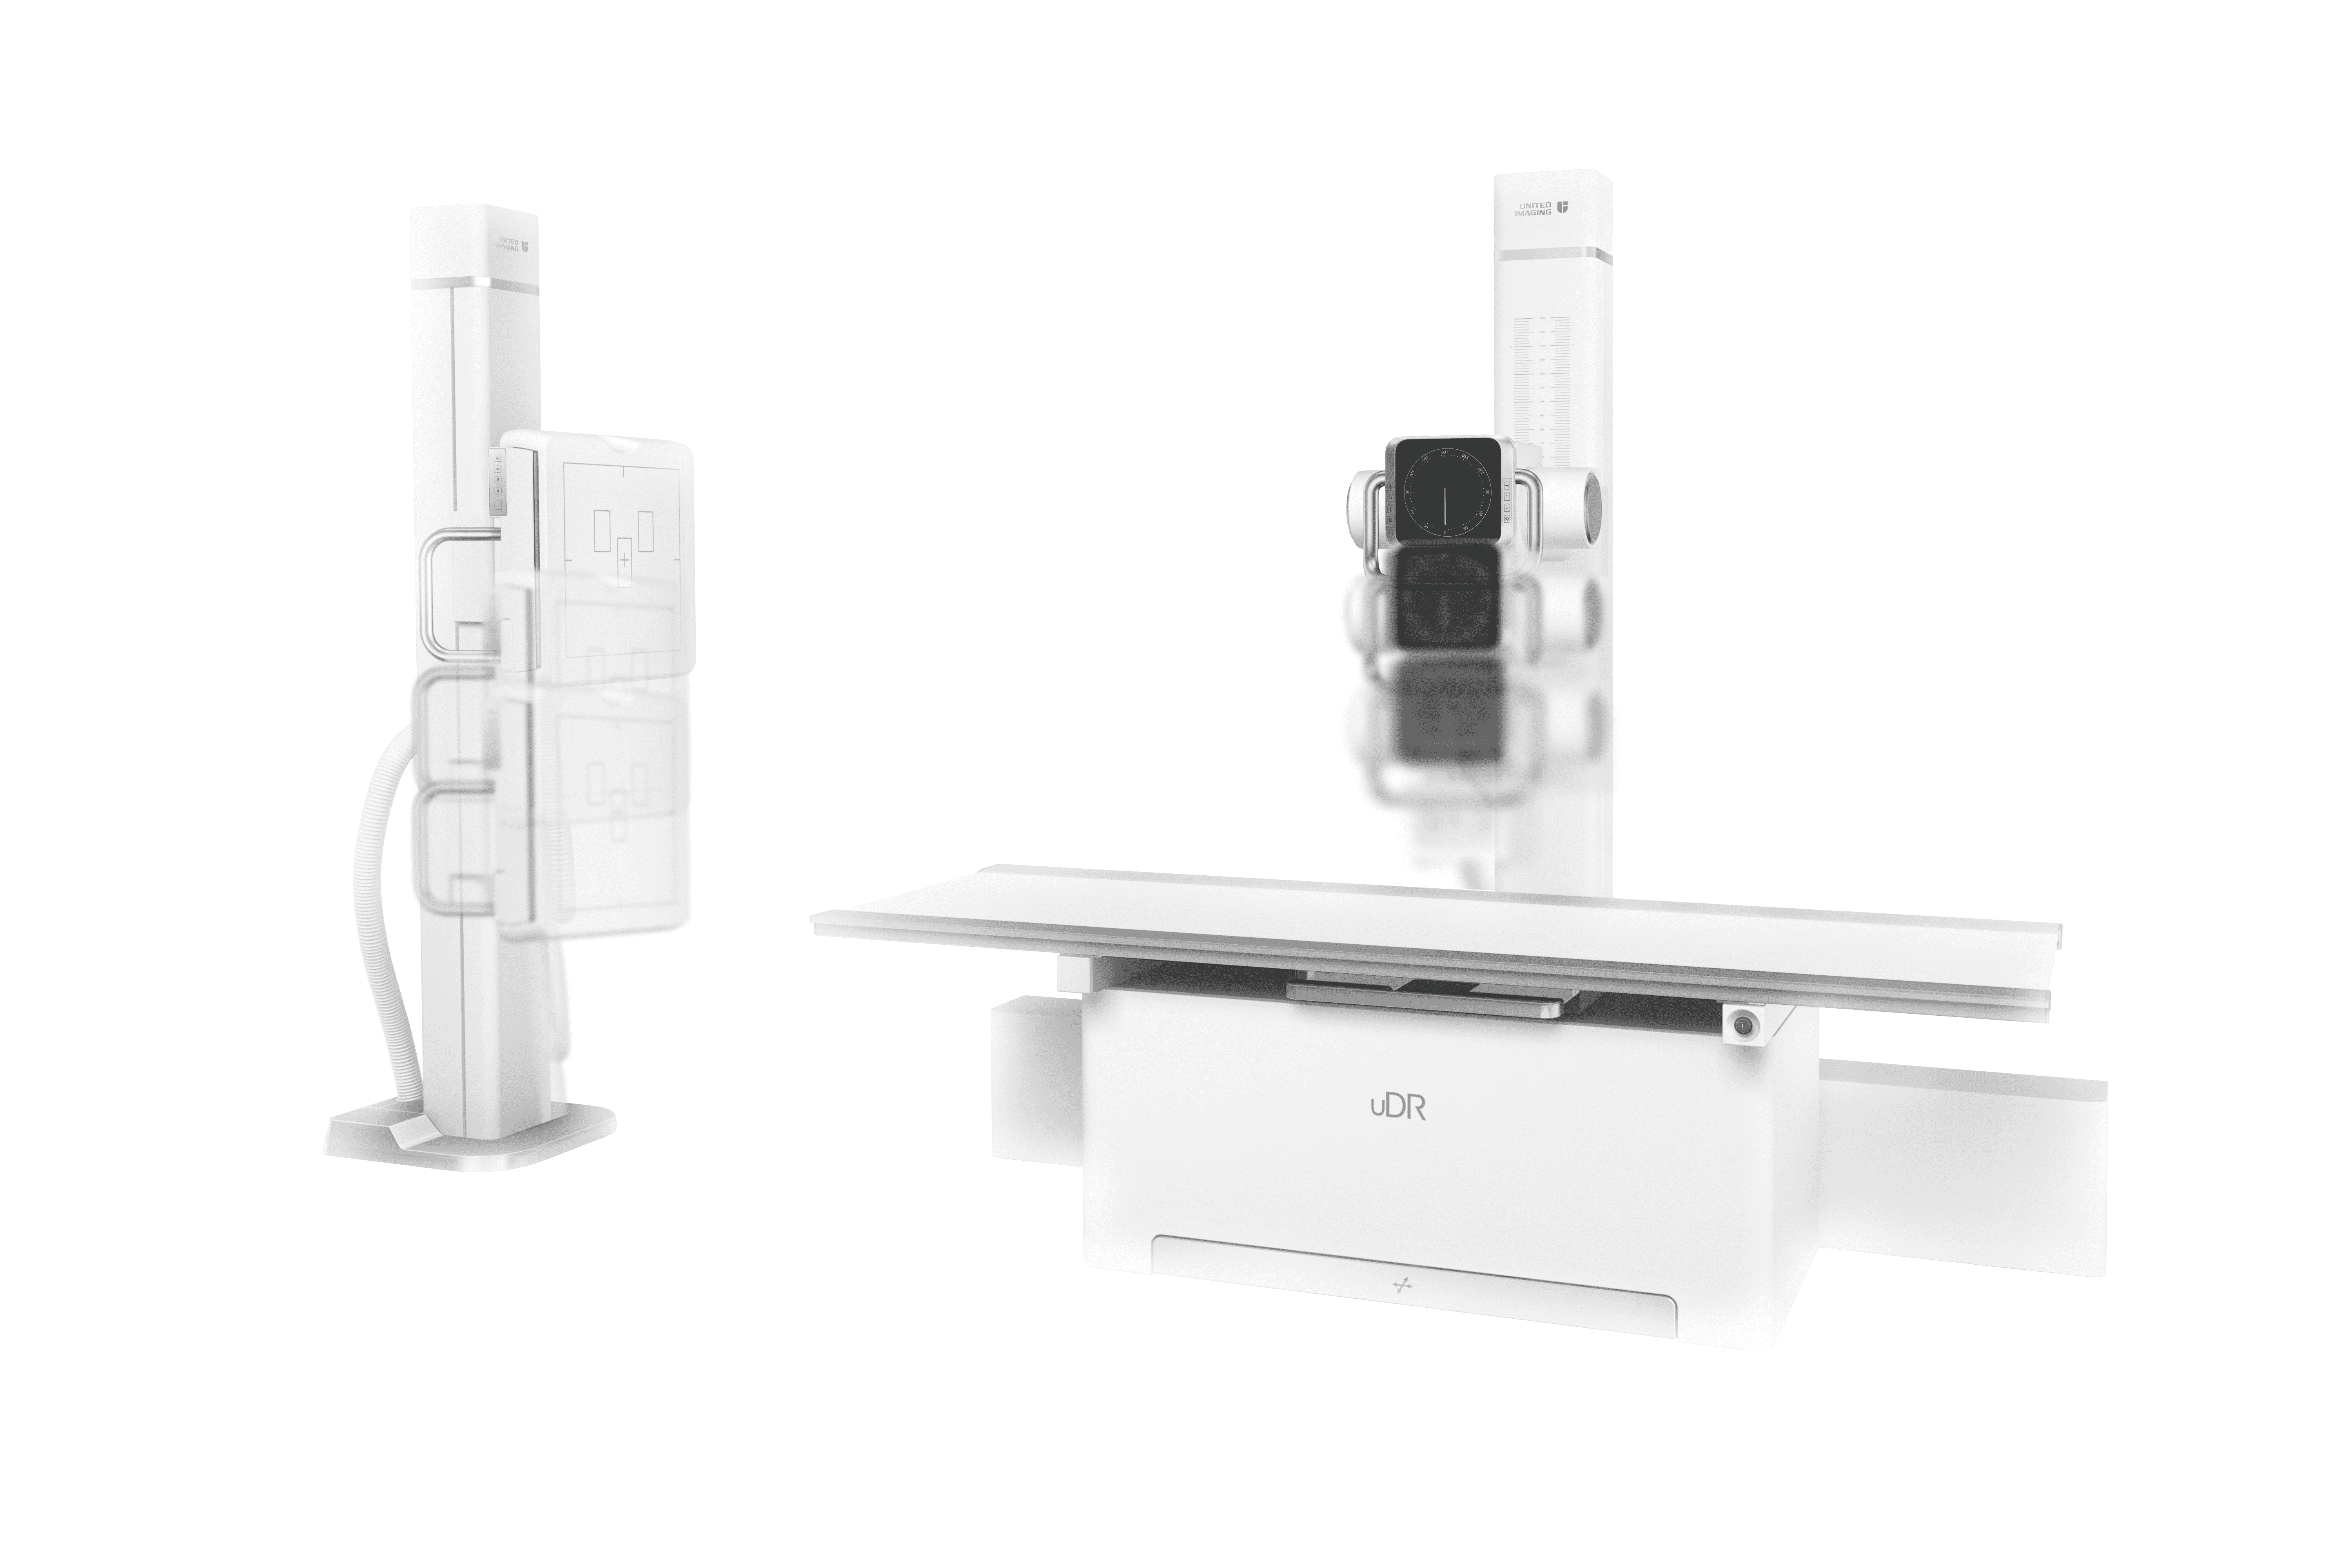 Motorized Bucky wall stand and column stand of uDR 566i